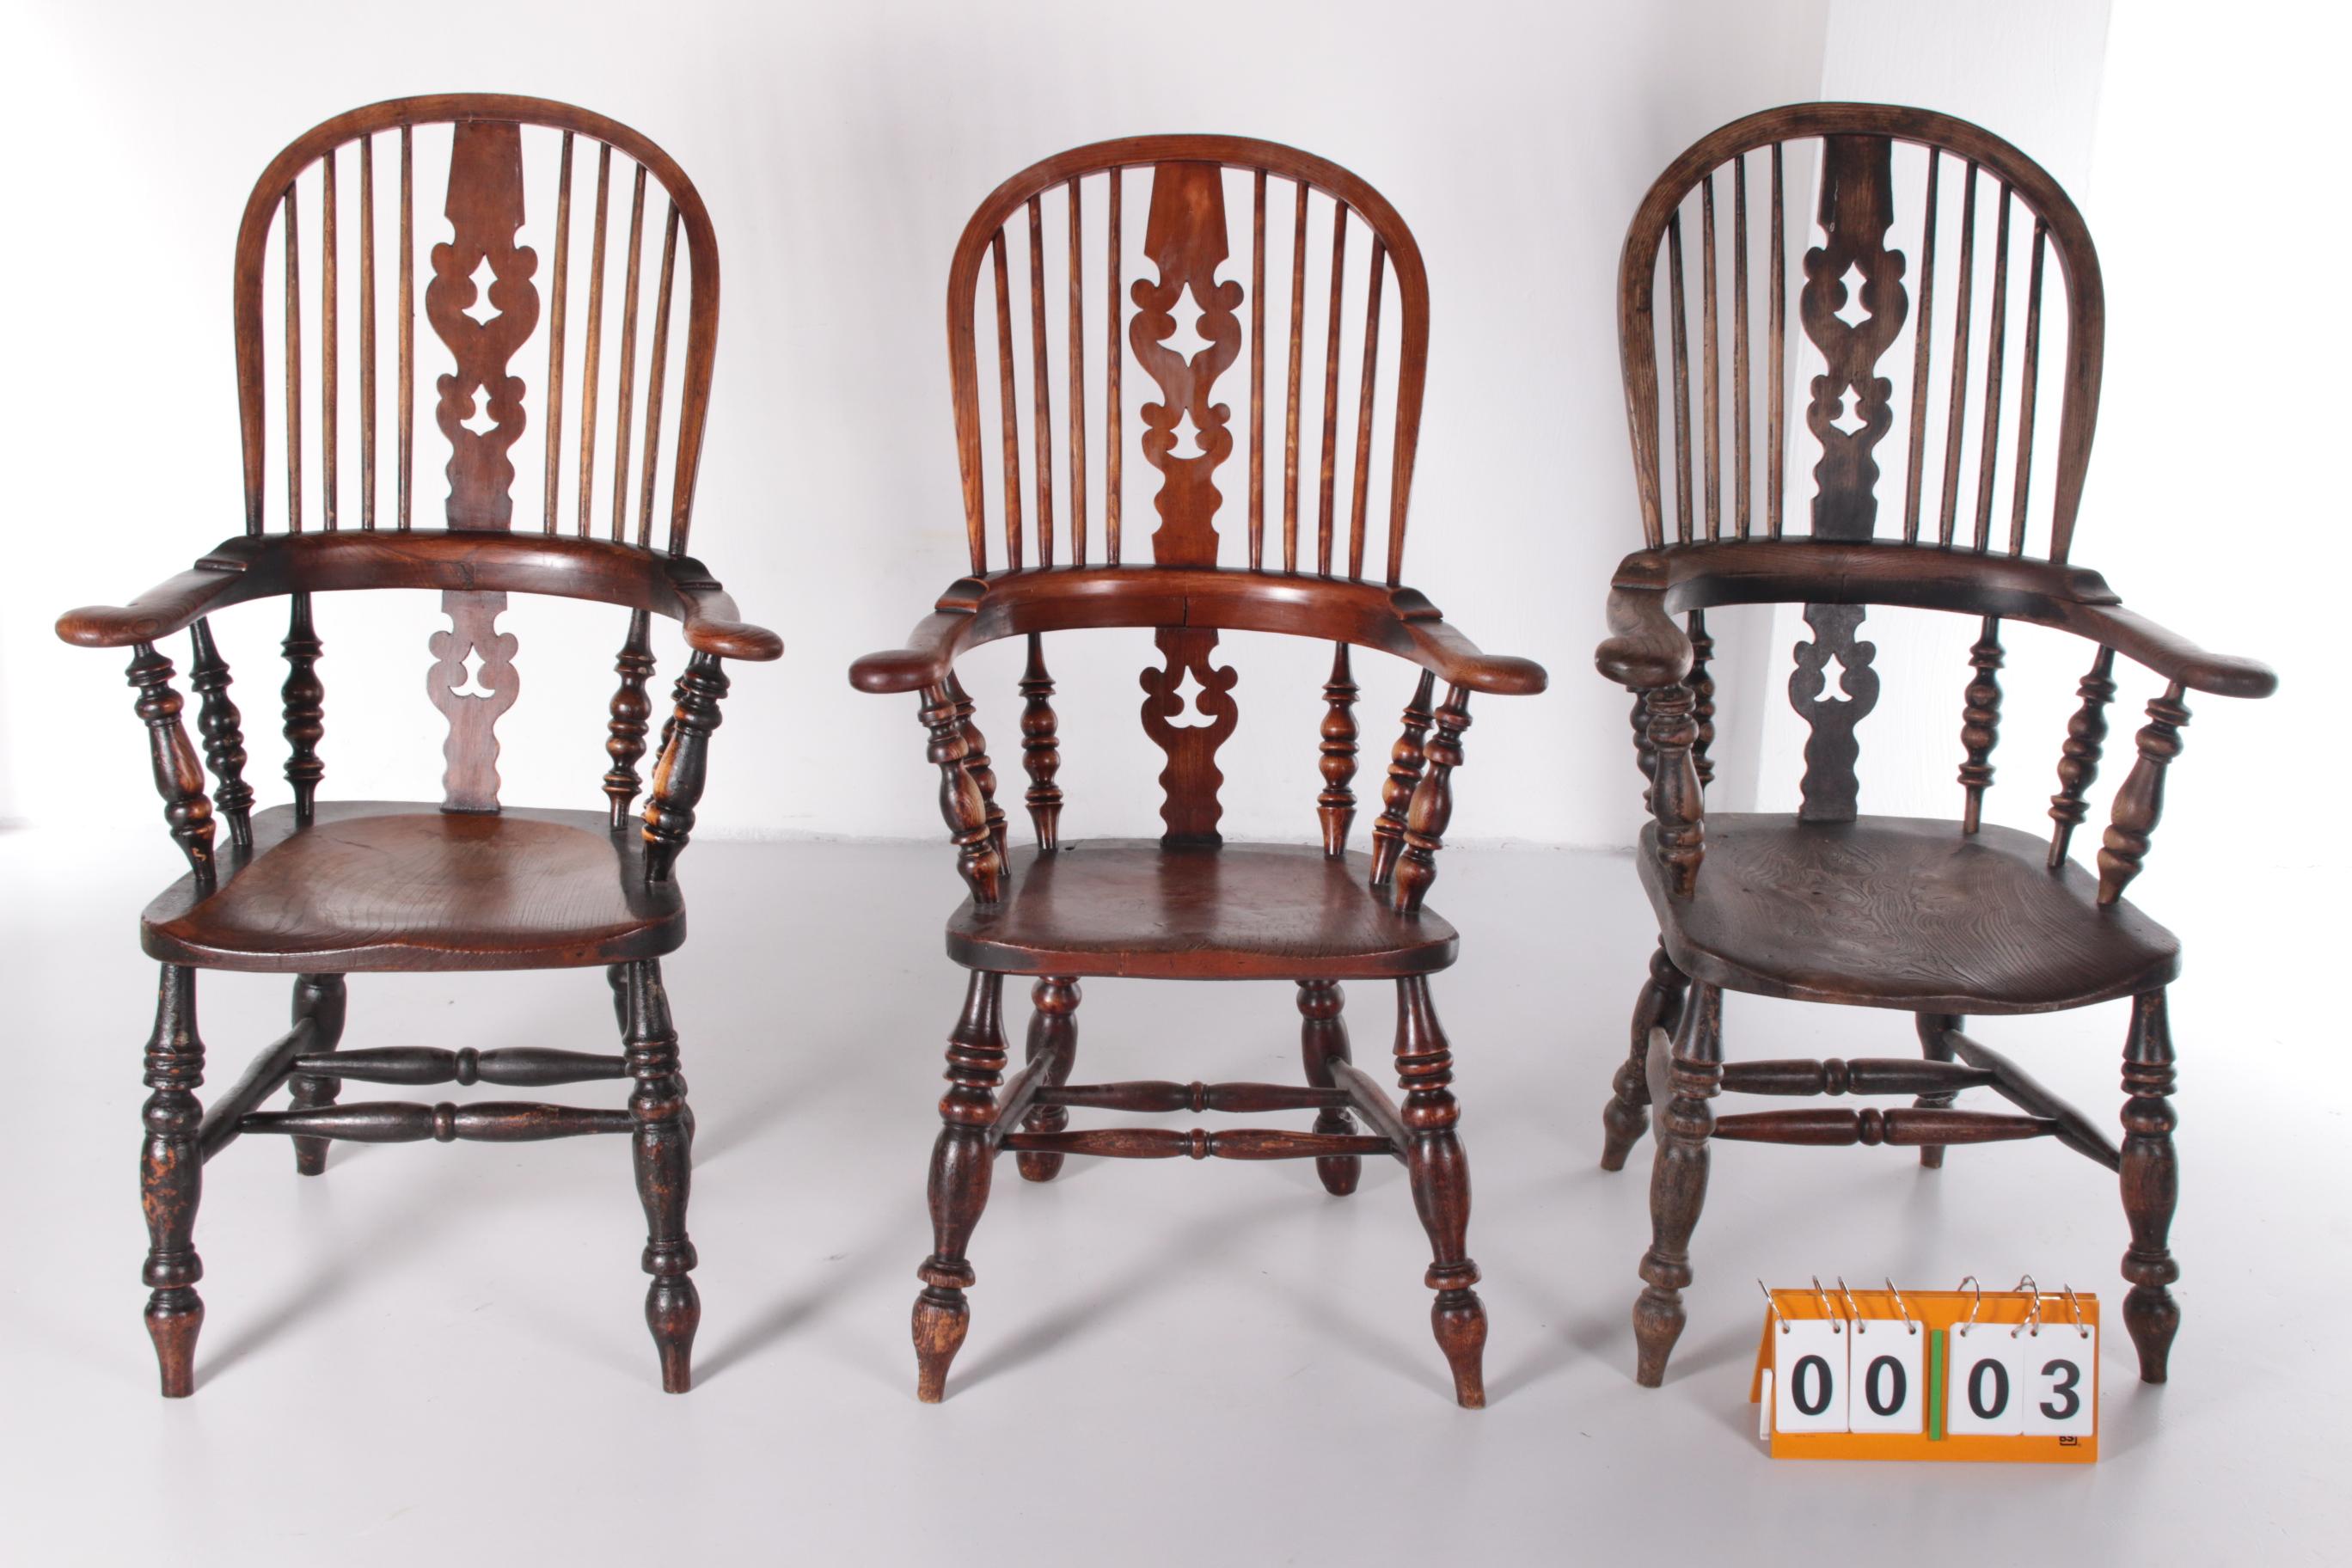 British Colonial 19th Set off 8 Nottinghamshire Yew Wood Hight Back Windsor Chairs